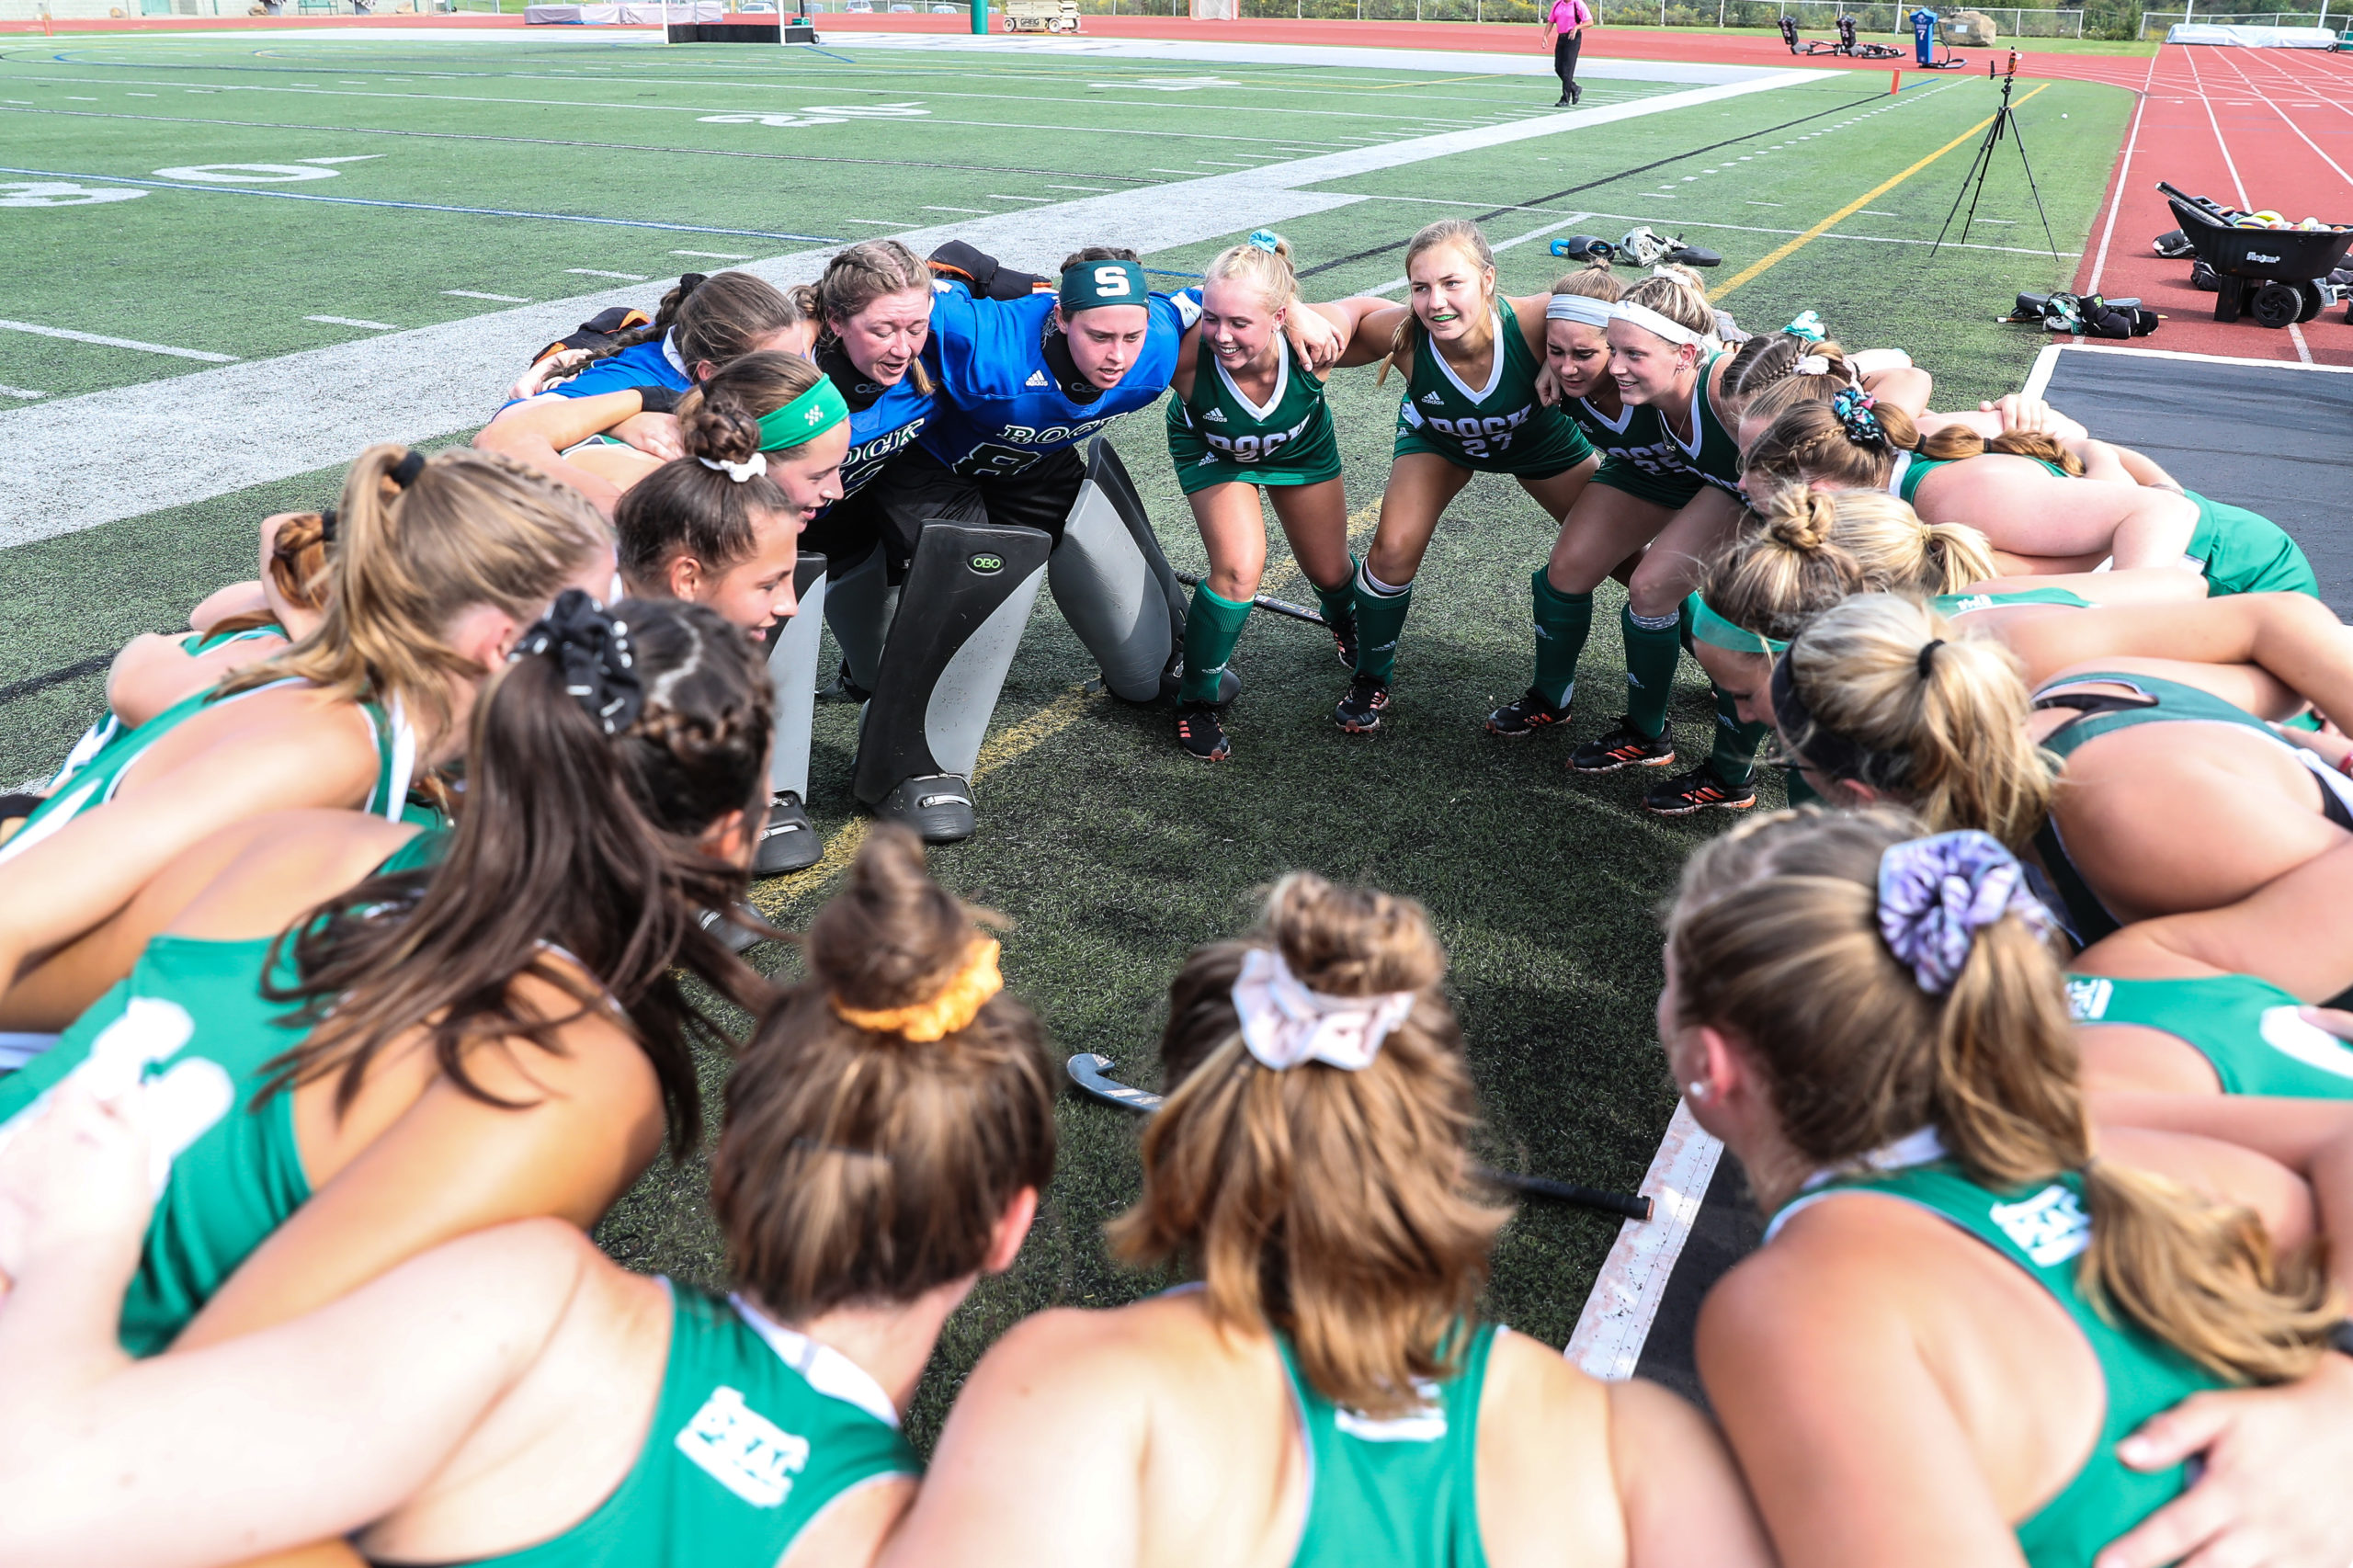 The Slippery Rock University field hockey team huddles in a circle in green uniforms.